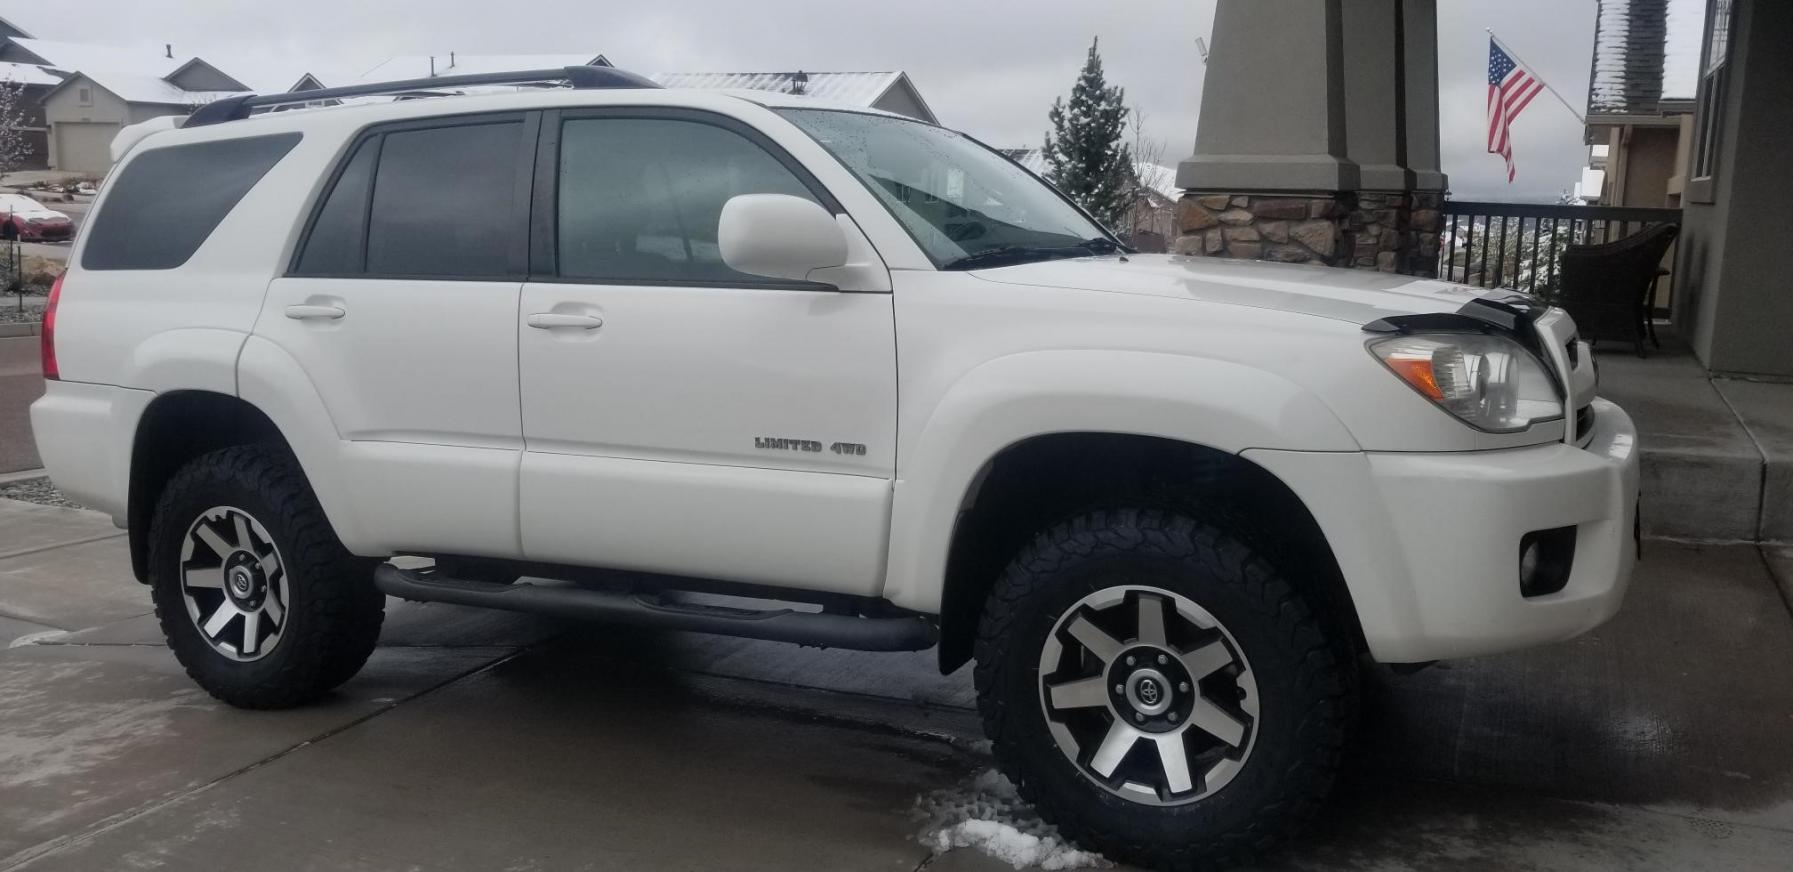 What did you do with your 4runner today?-4runner_new-tires-jpg